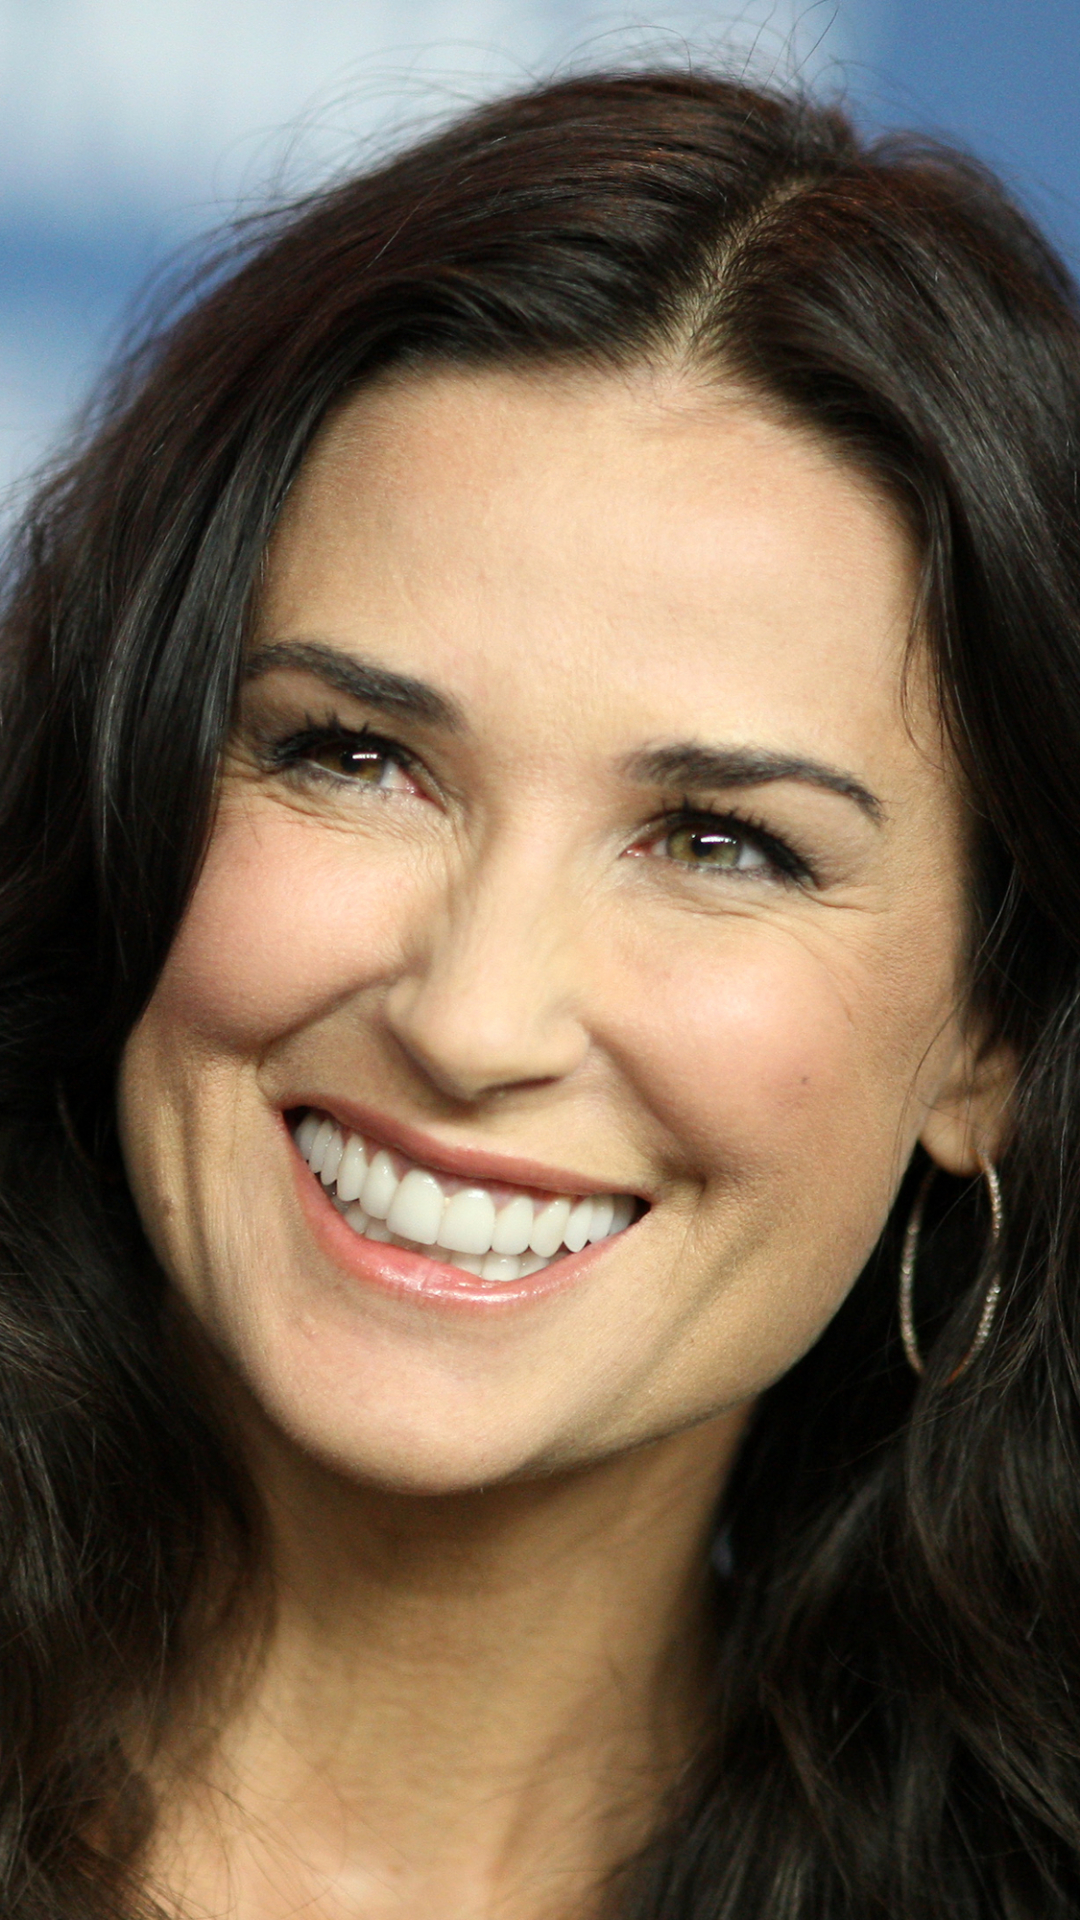 celebrity, demi moore, american, actress wallpaper for mobile